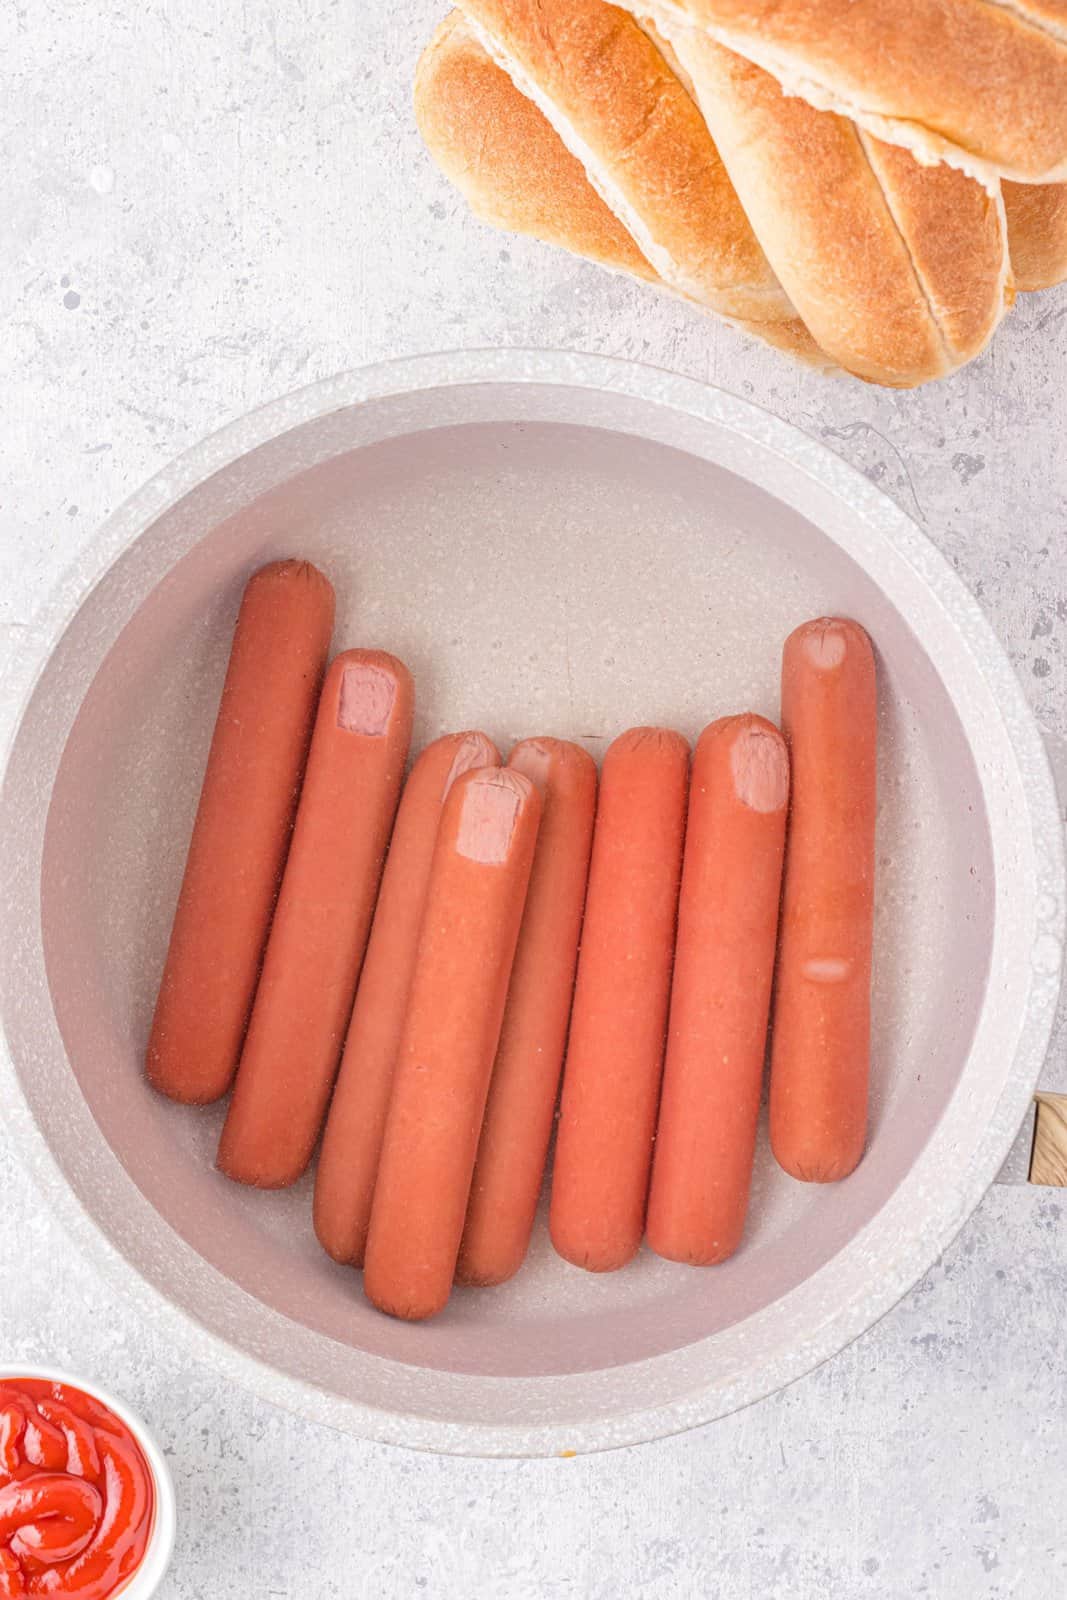 Hot dogs being boiled in pan.